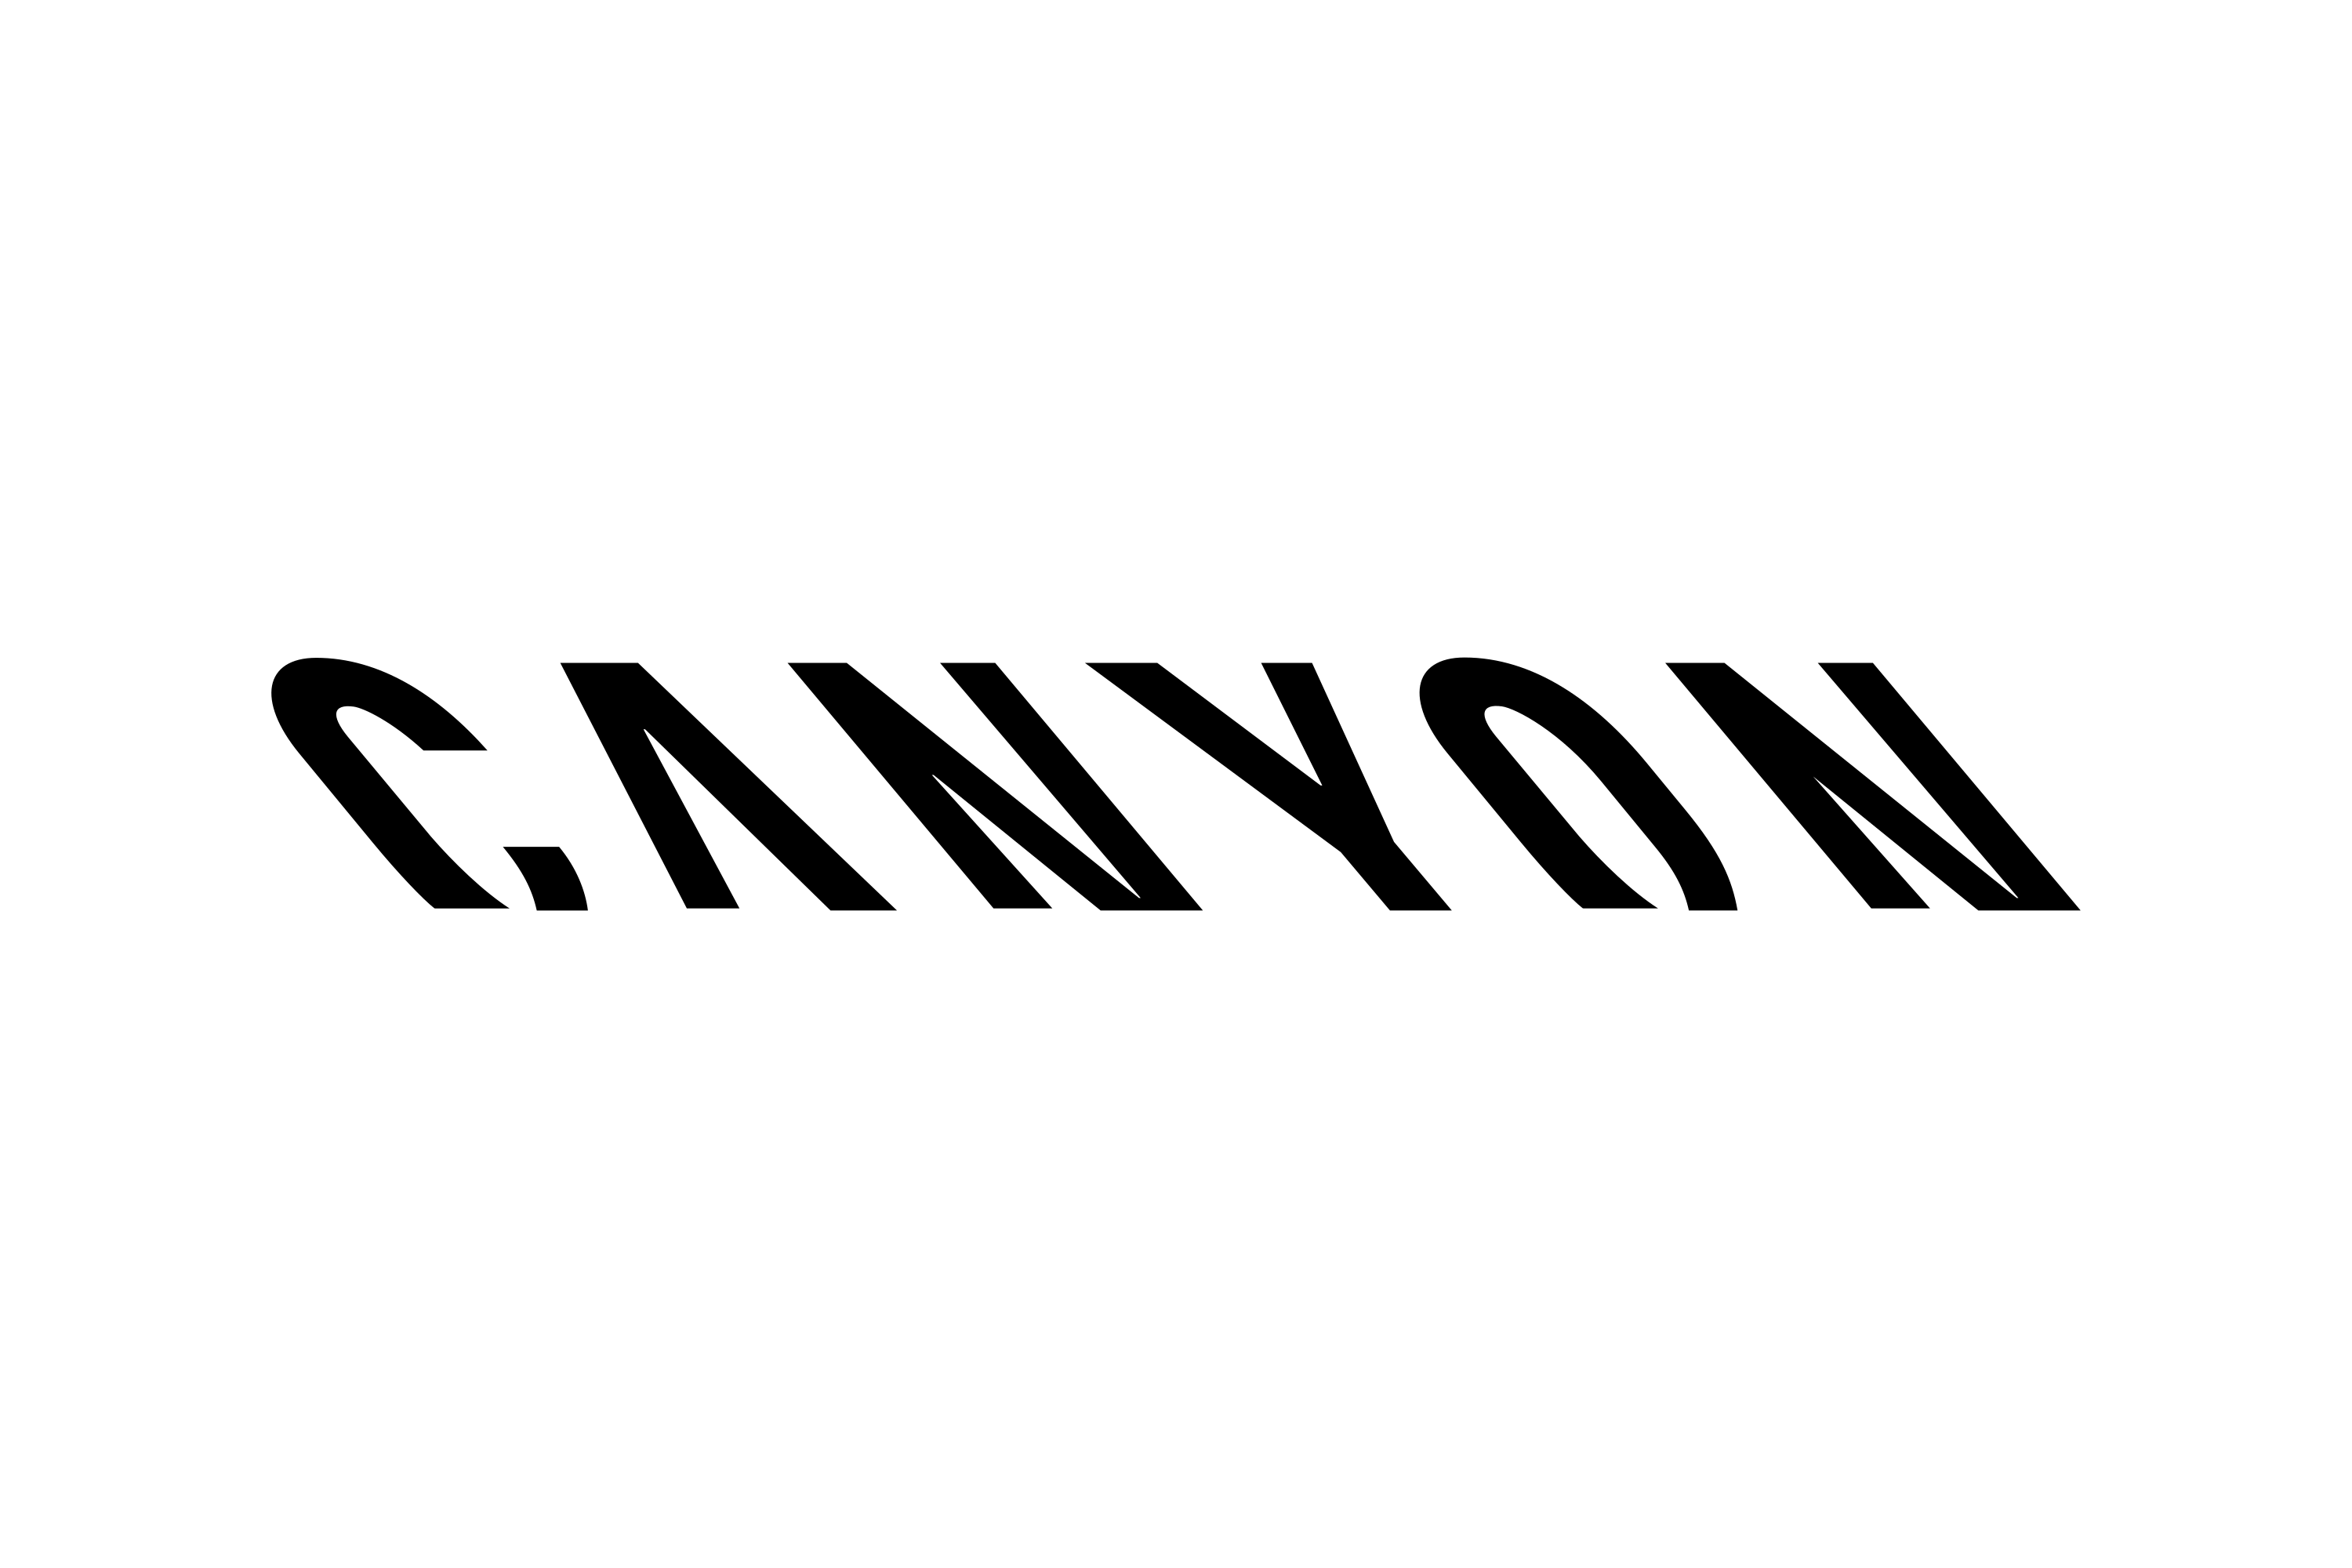 Download Canyon Bicycles Logo in SVG Vector or PNG File Format - Logo.wine